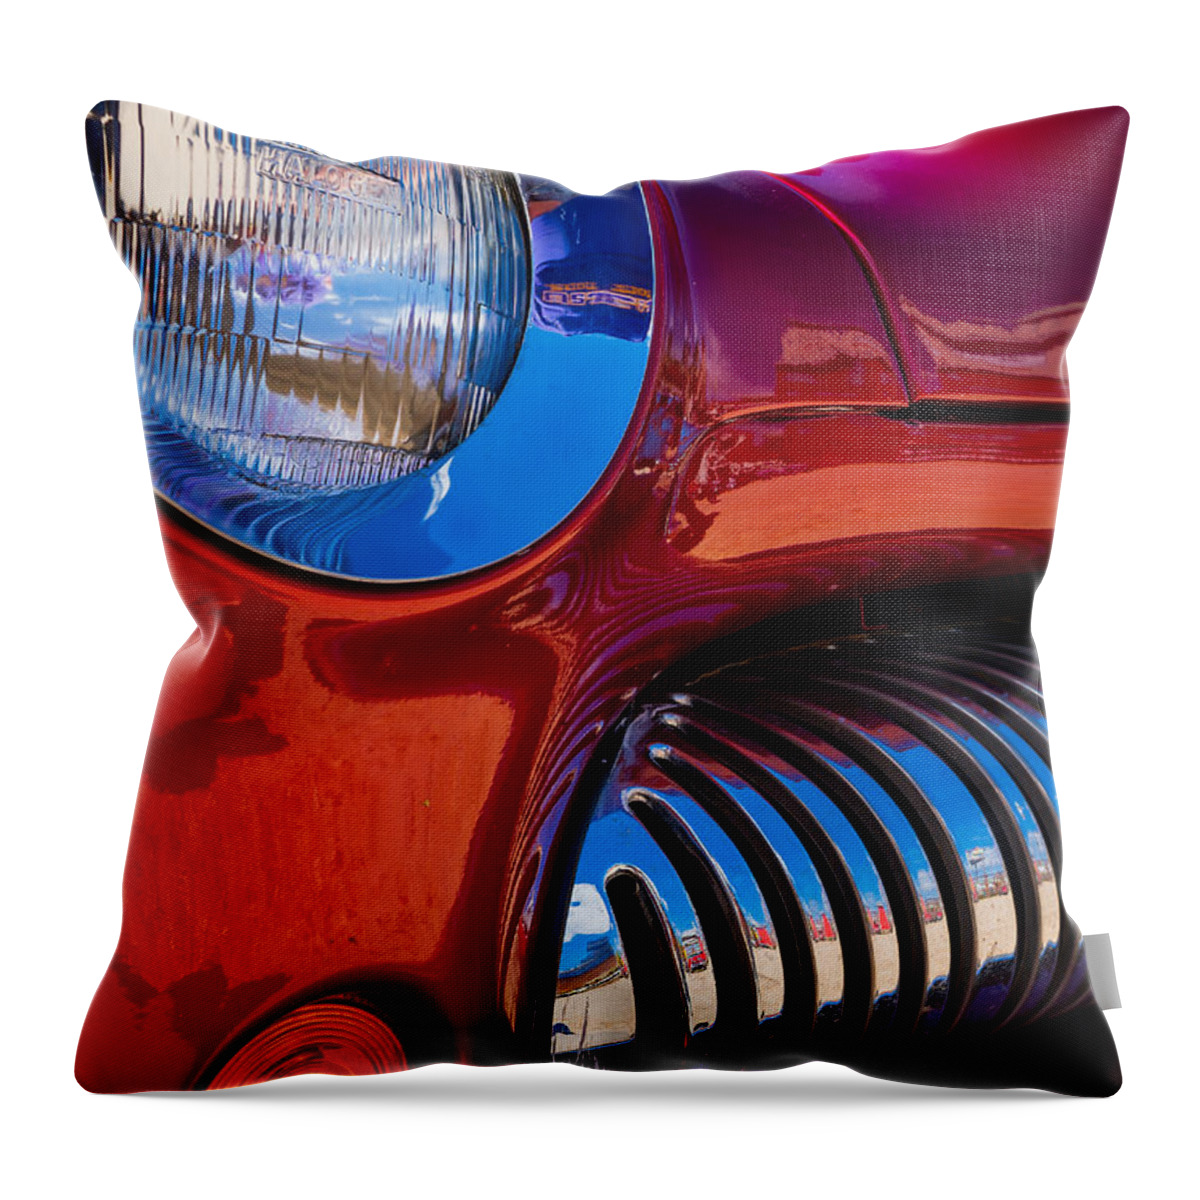 Red Throw Pillow featuring the photograph Red Car Chrome Grill by Tom Gresham